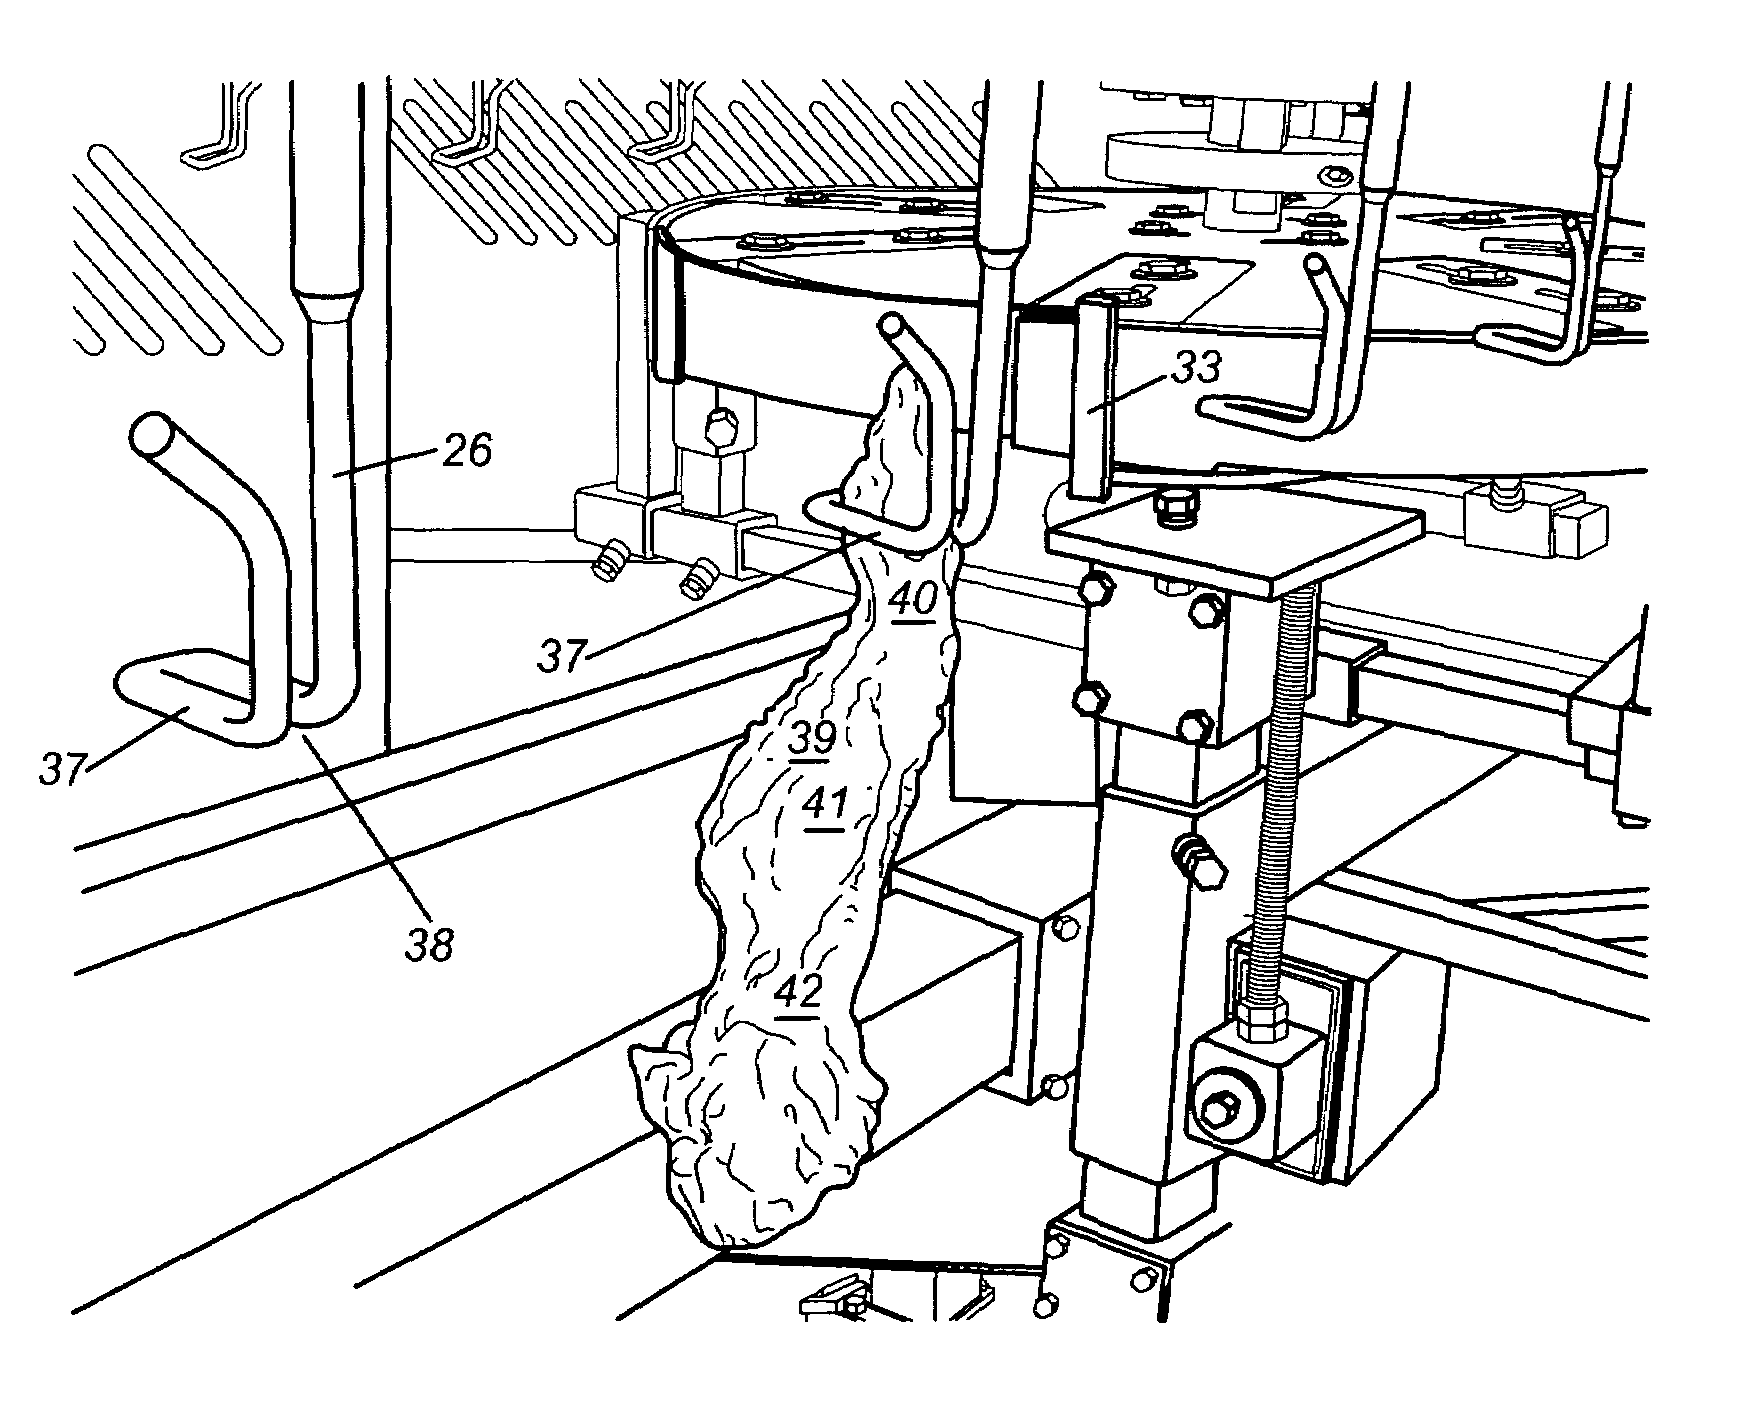 Poultry wing separator and partial deboner